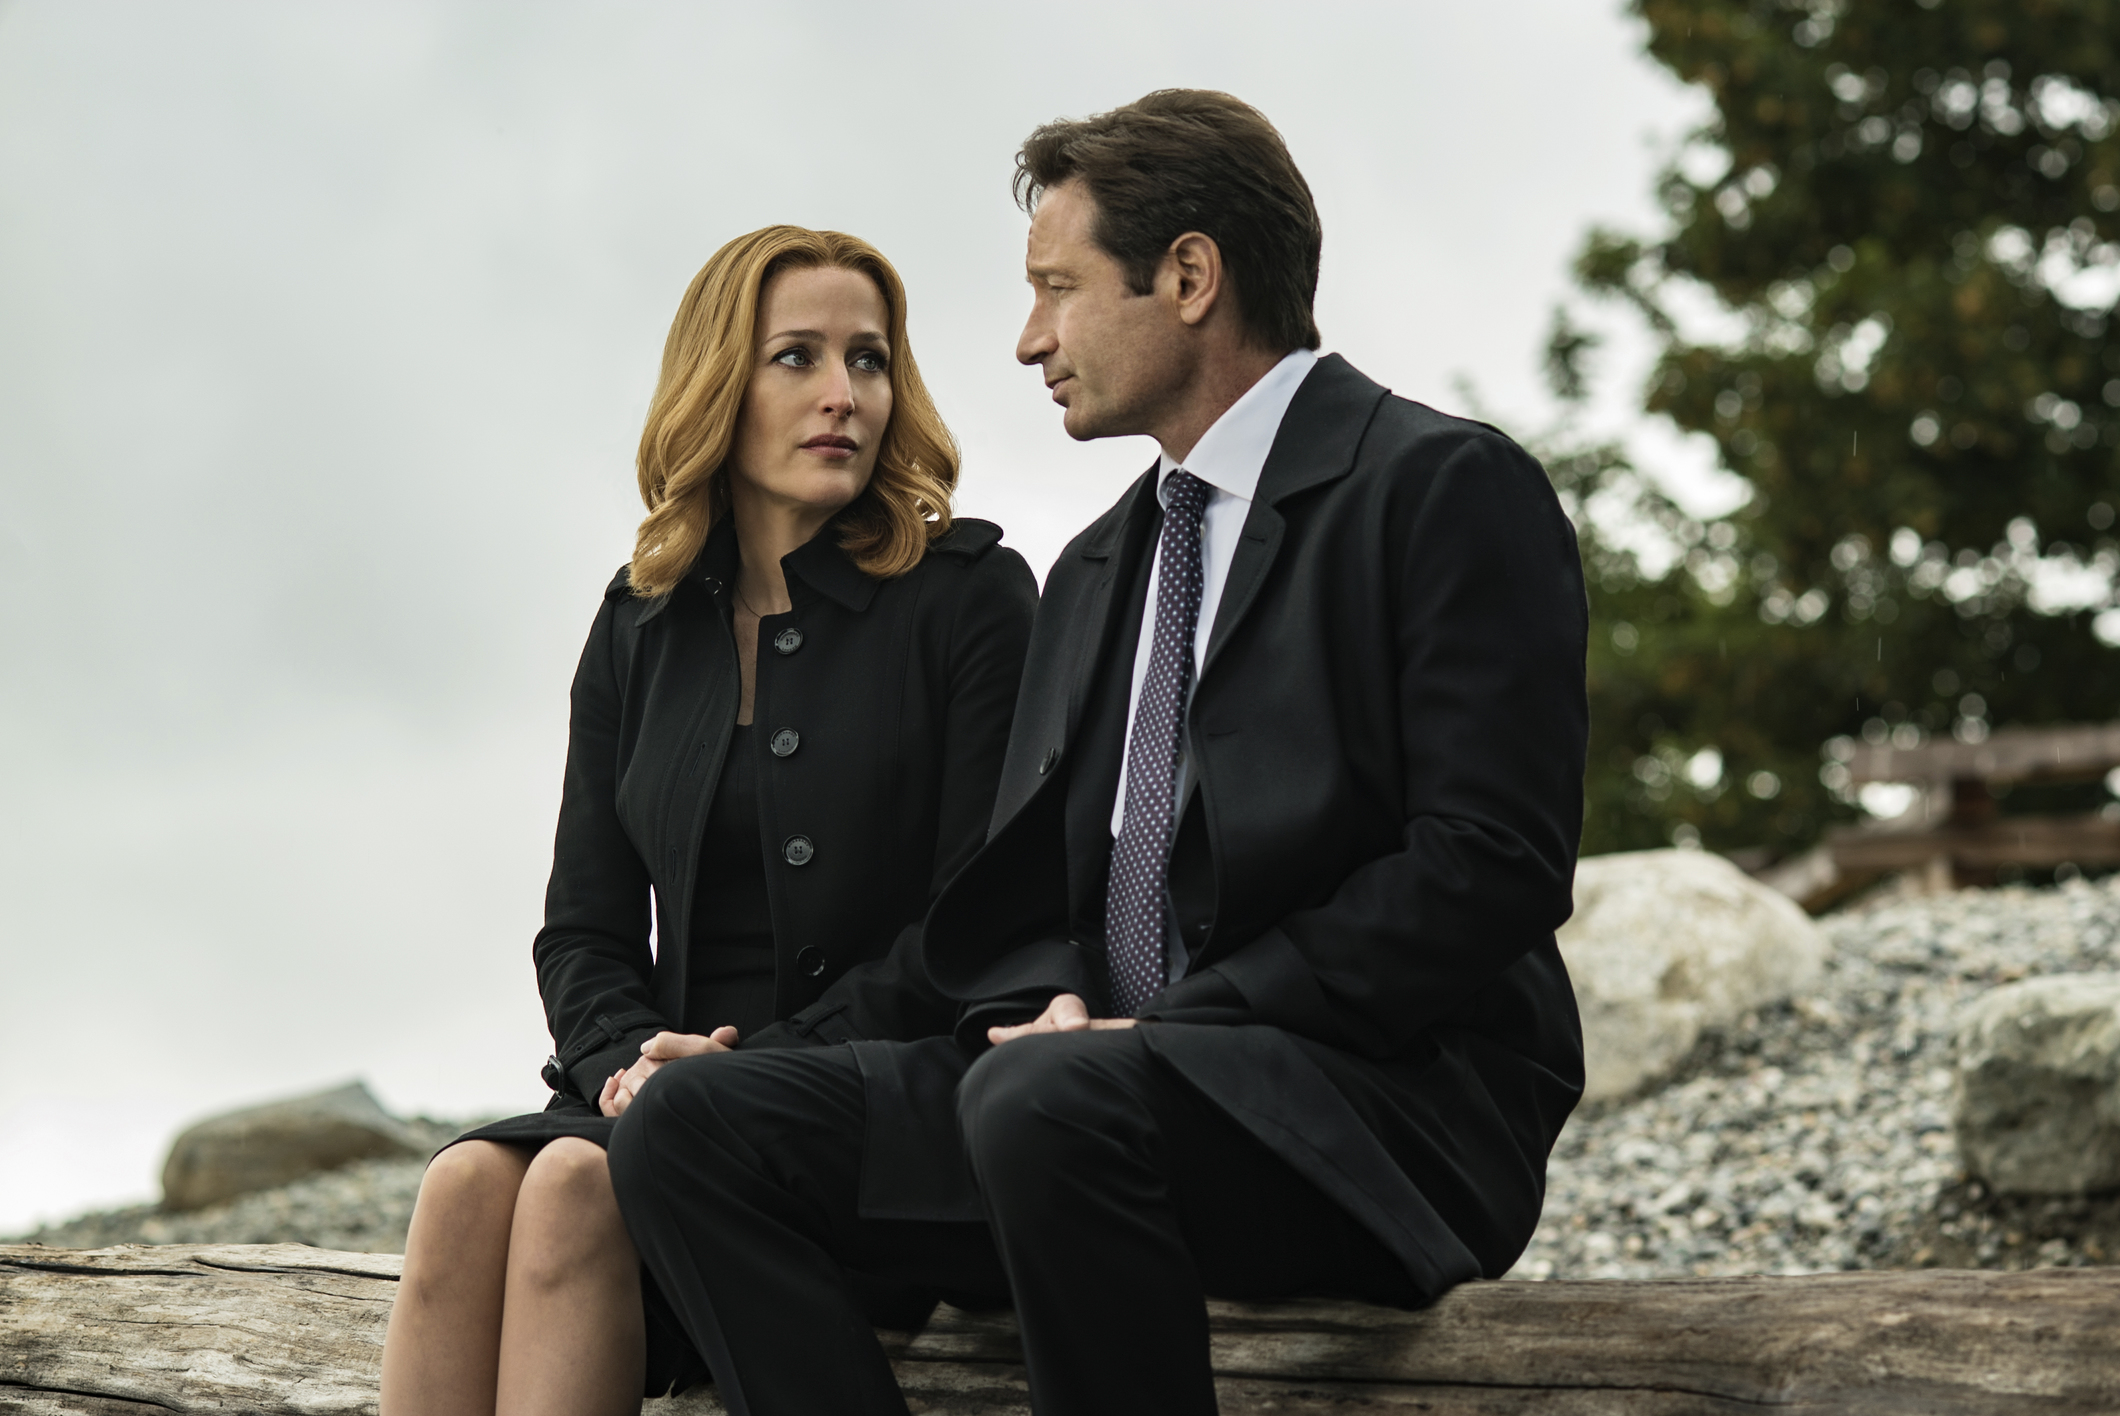 THE X-FILES: L-R: Gillian Anderson and David Duchovny in the "Home Again" episode of THE X-FILES airing Monday, Feb. 8 (8:00-9:00 PM ET/PT) on FOX. ©2016 Fox Broadcasting Co. Cr: Ed Araquel/FOX